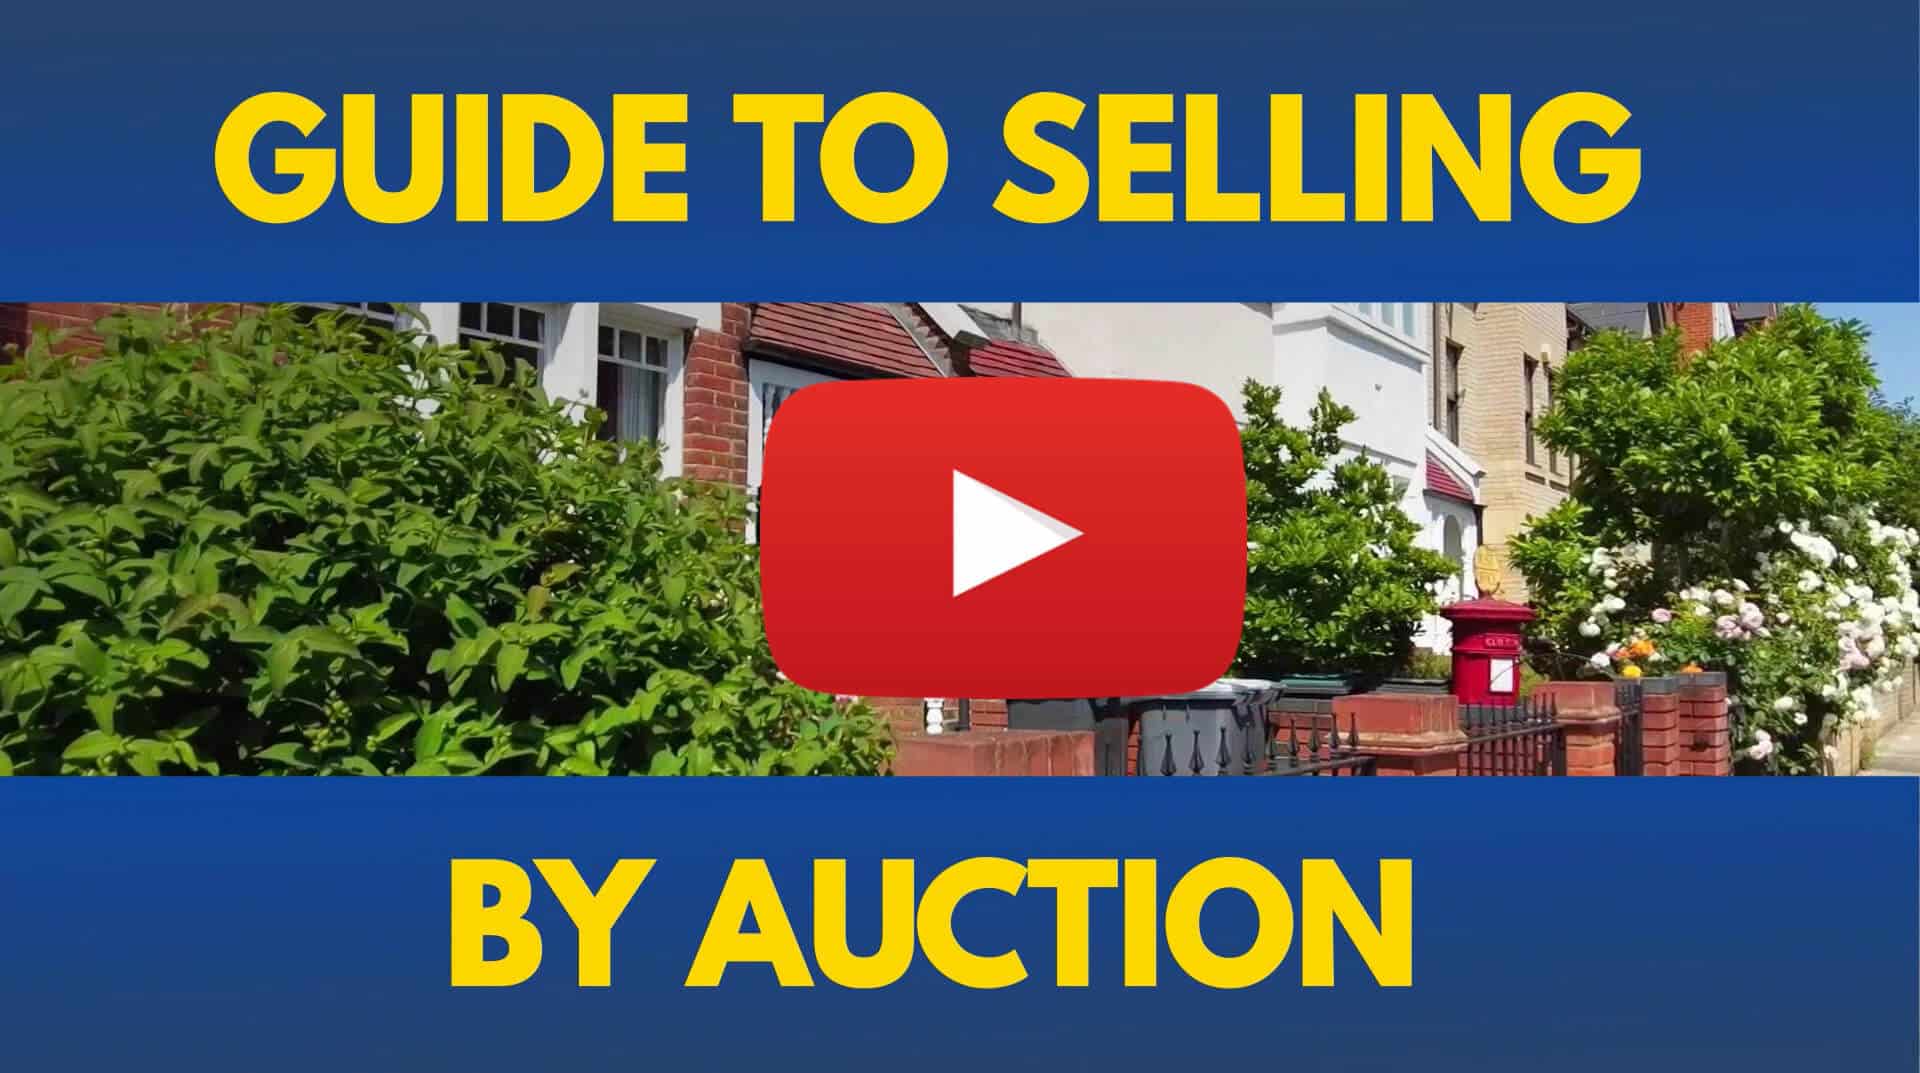 Guide to Selling a House by Auction - Watch Our Video